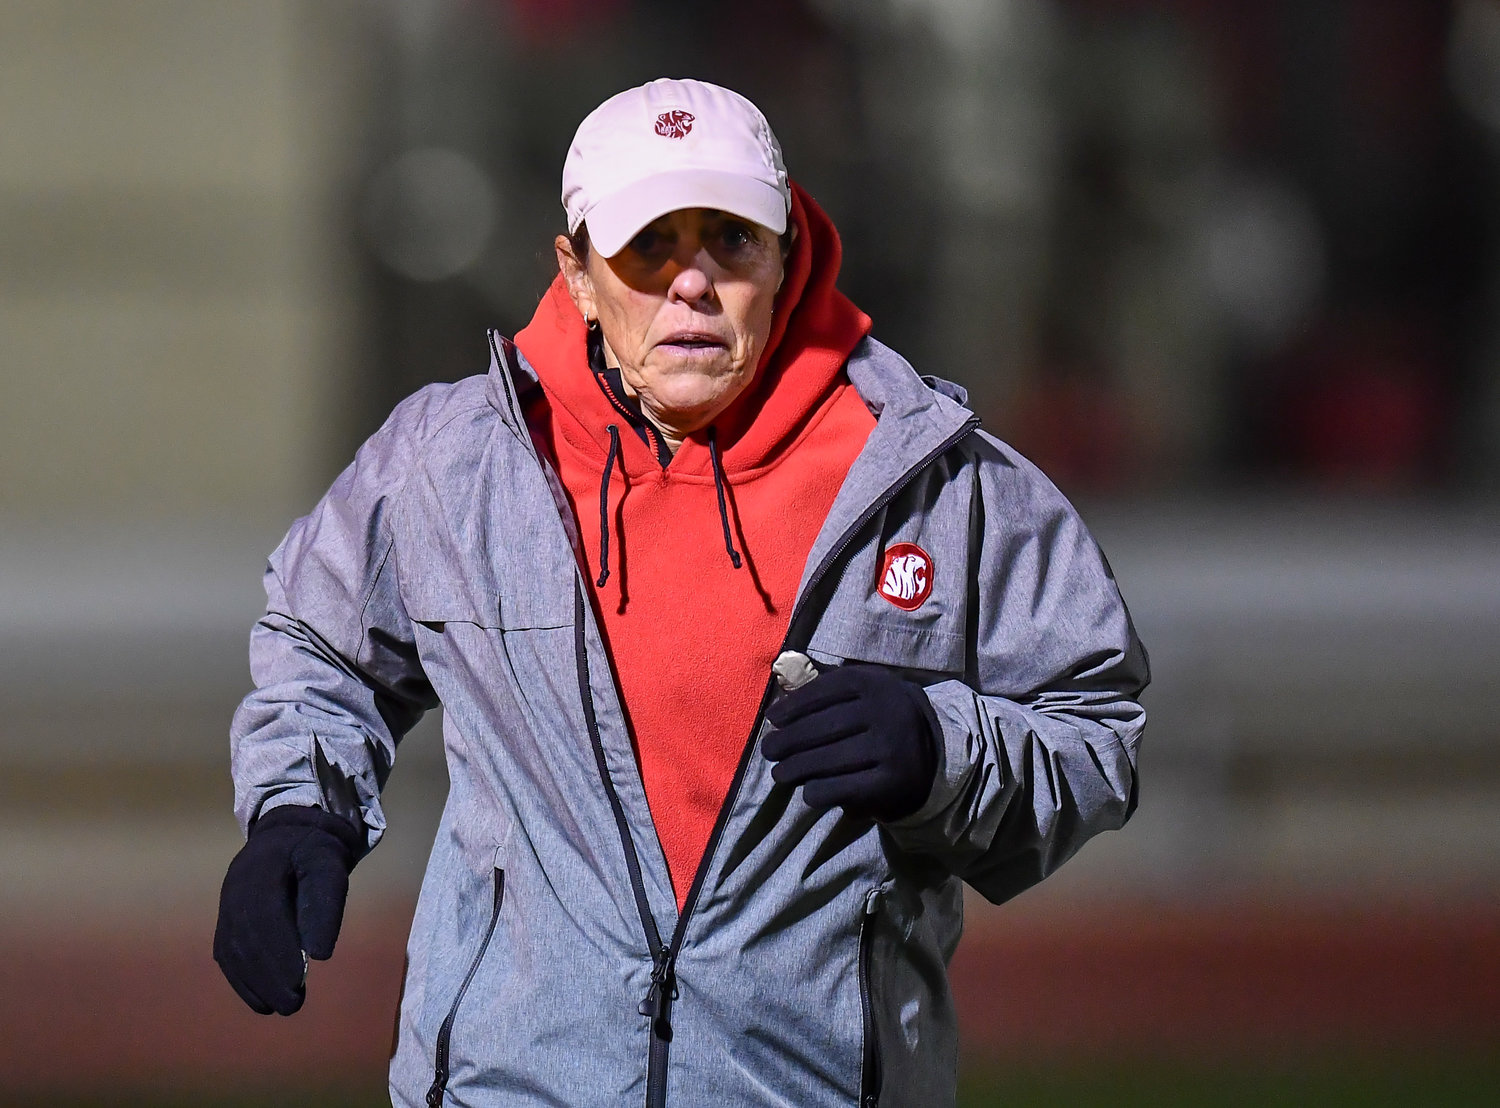 March 8,, 2022: Katy's head coach Dianne Loftin takes the field to start the second period of the soccer match between Katy an Katy Taylor. (Photo by Mark Goodman / Katy Times)